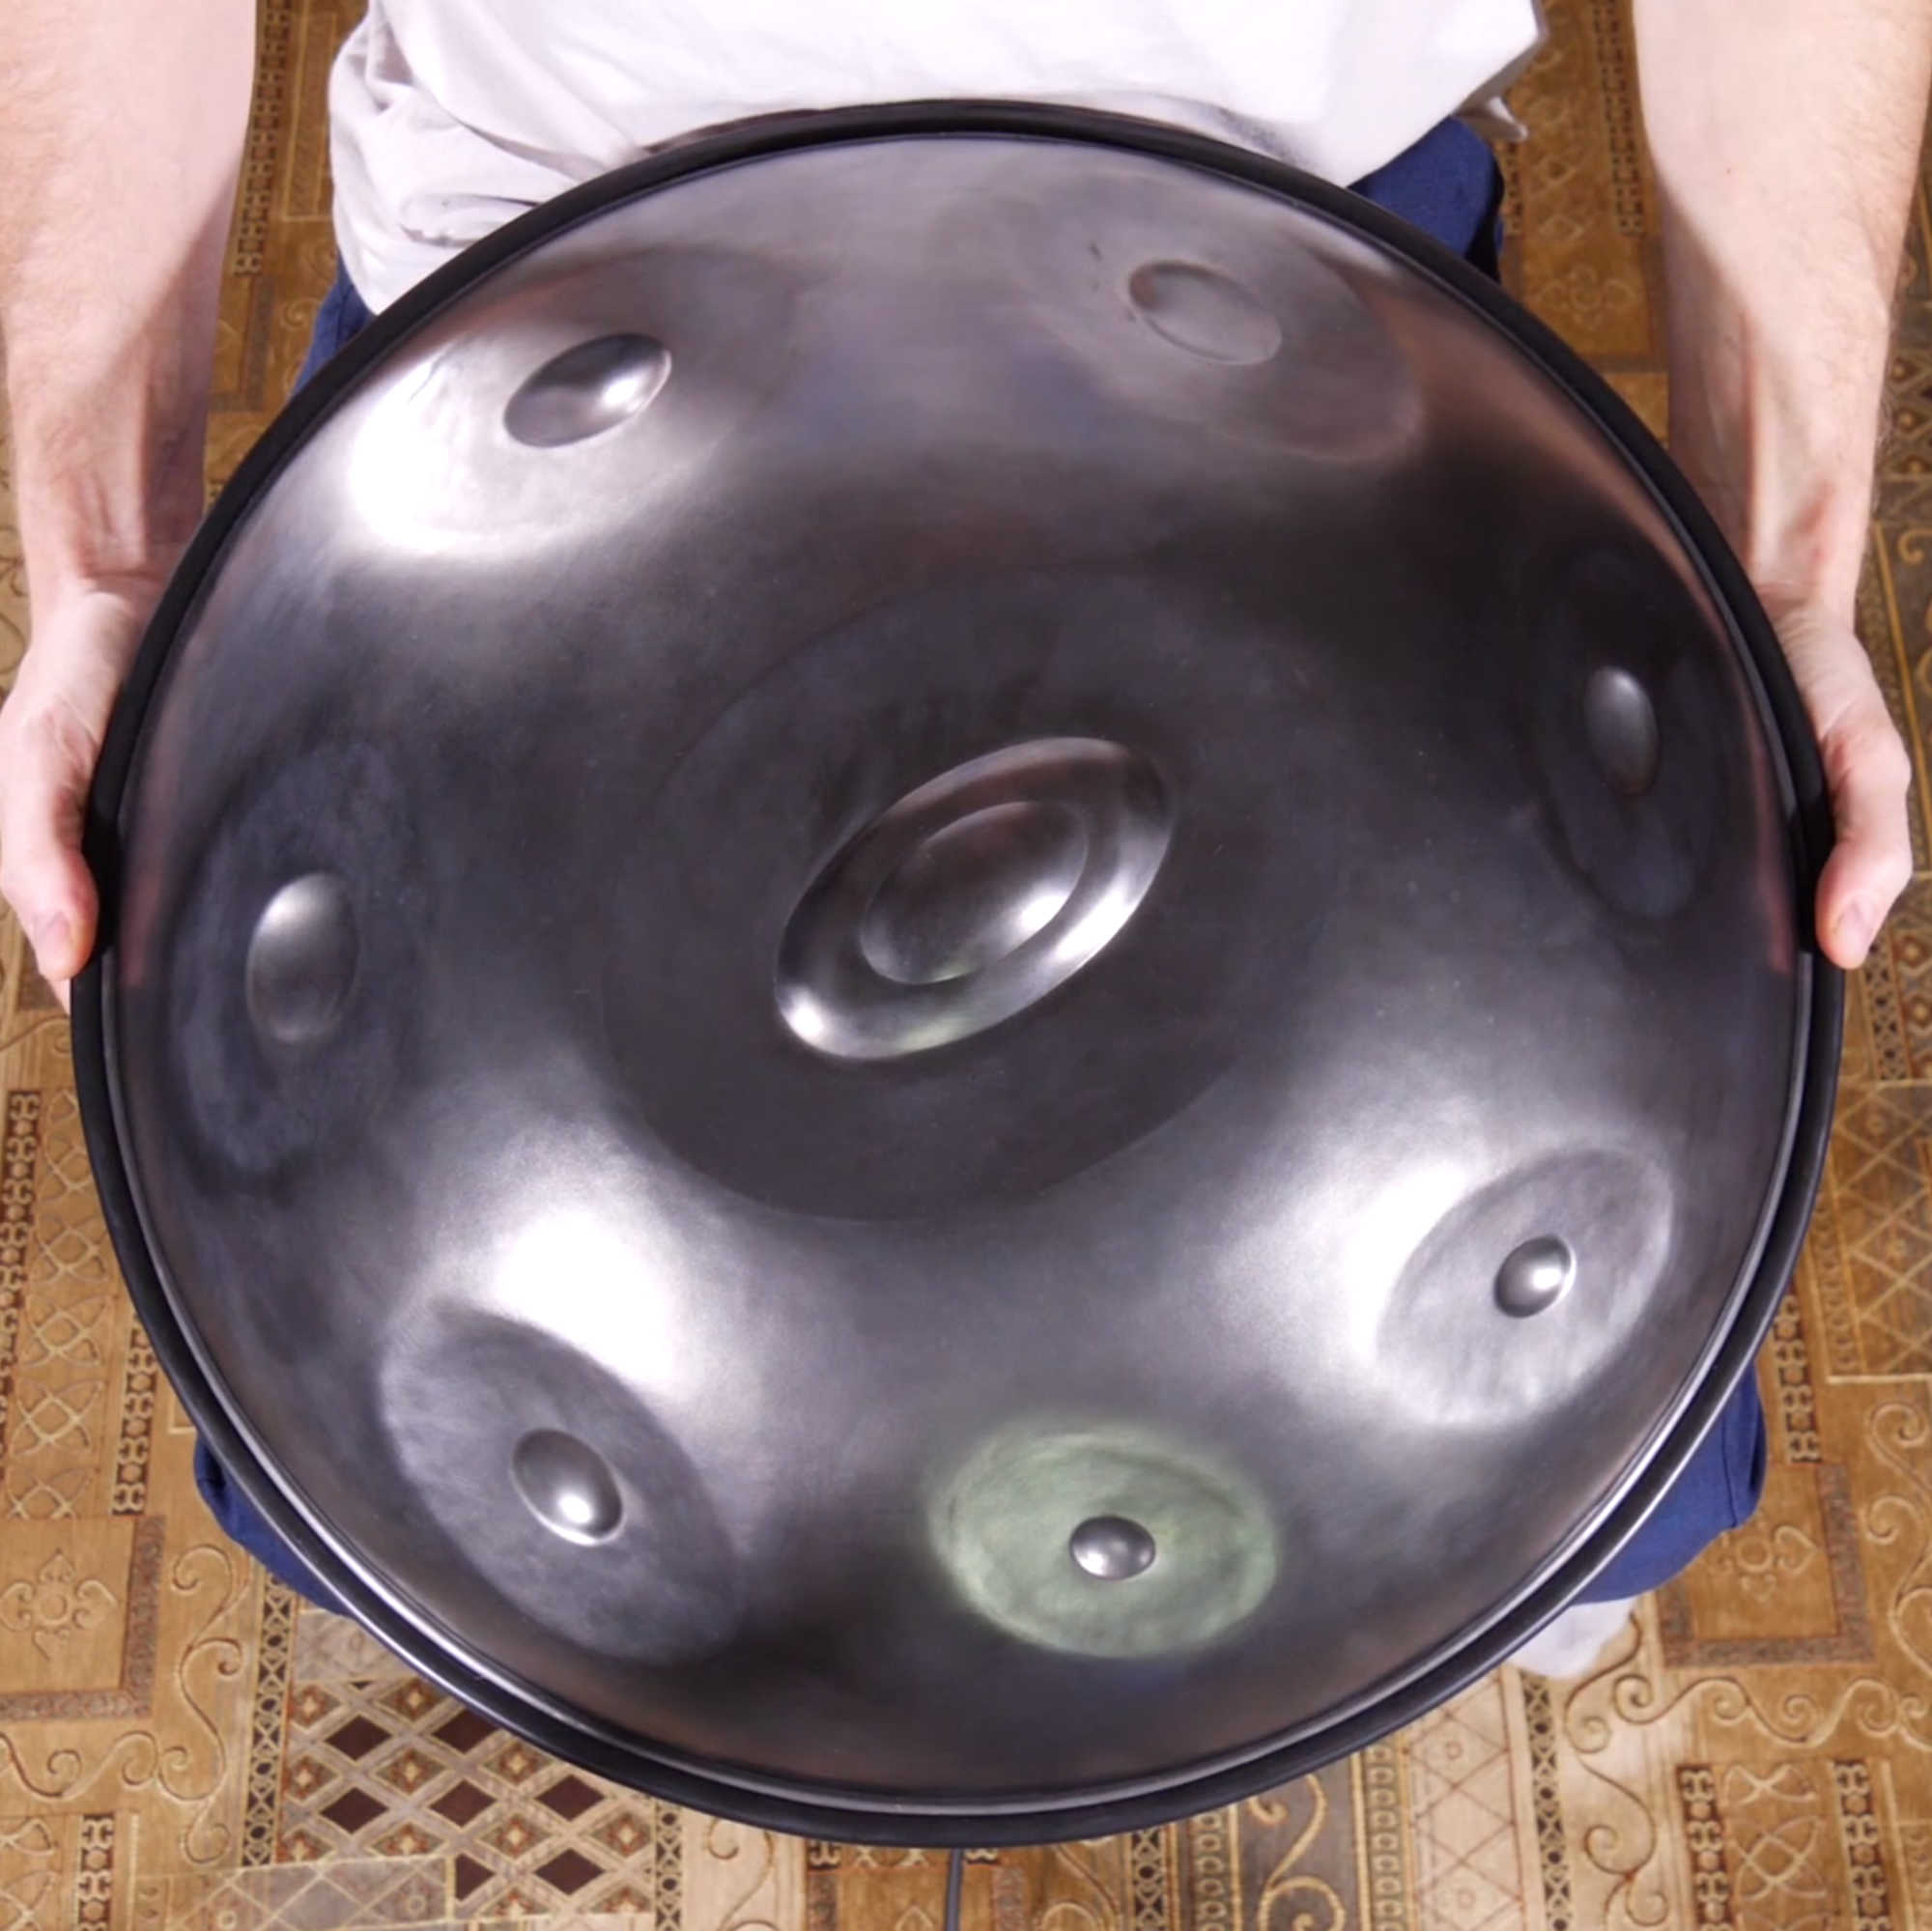 Minor Professional Series Saraz Handpan available for purchase